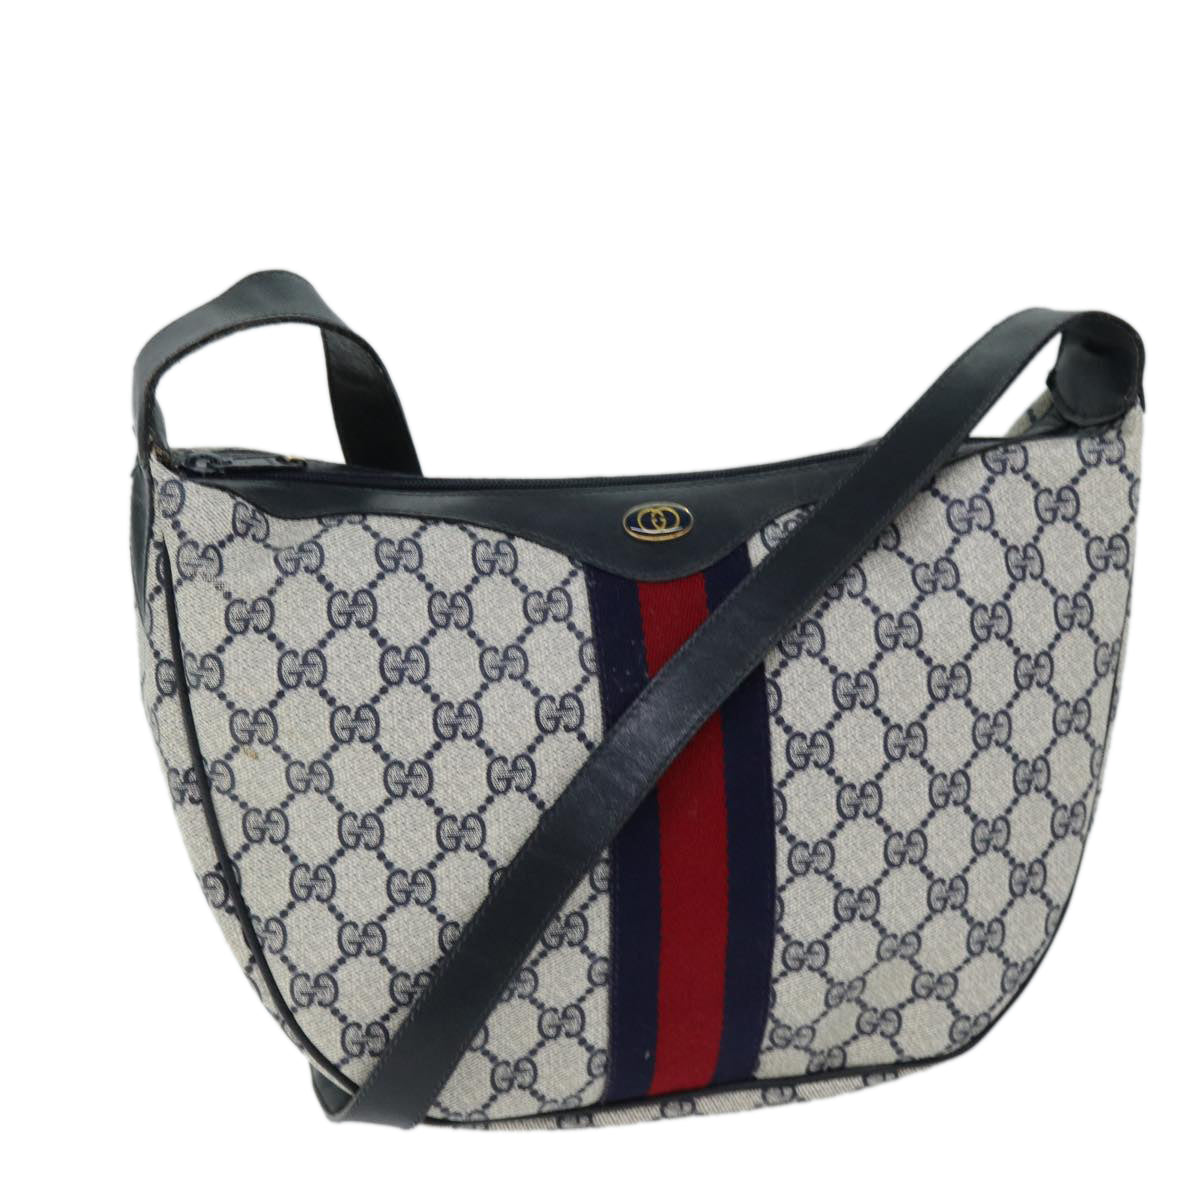 GUCCI GG Supreme Sherry Line Shoulder Bag PVC Navy Red 10 2 3840 Auth yk12637